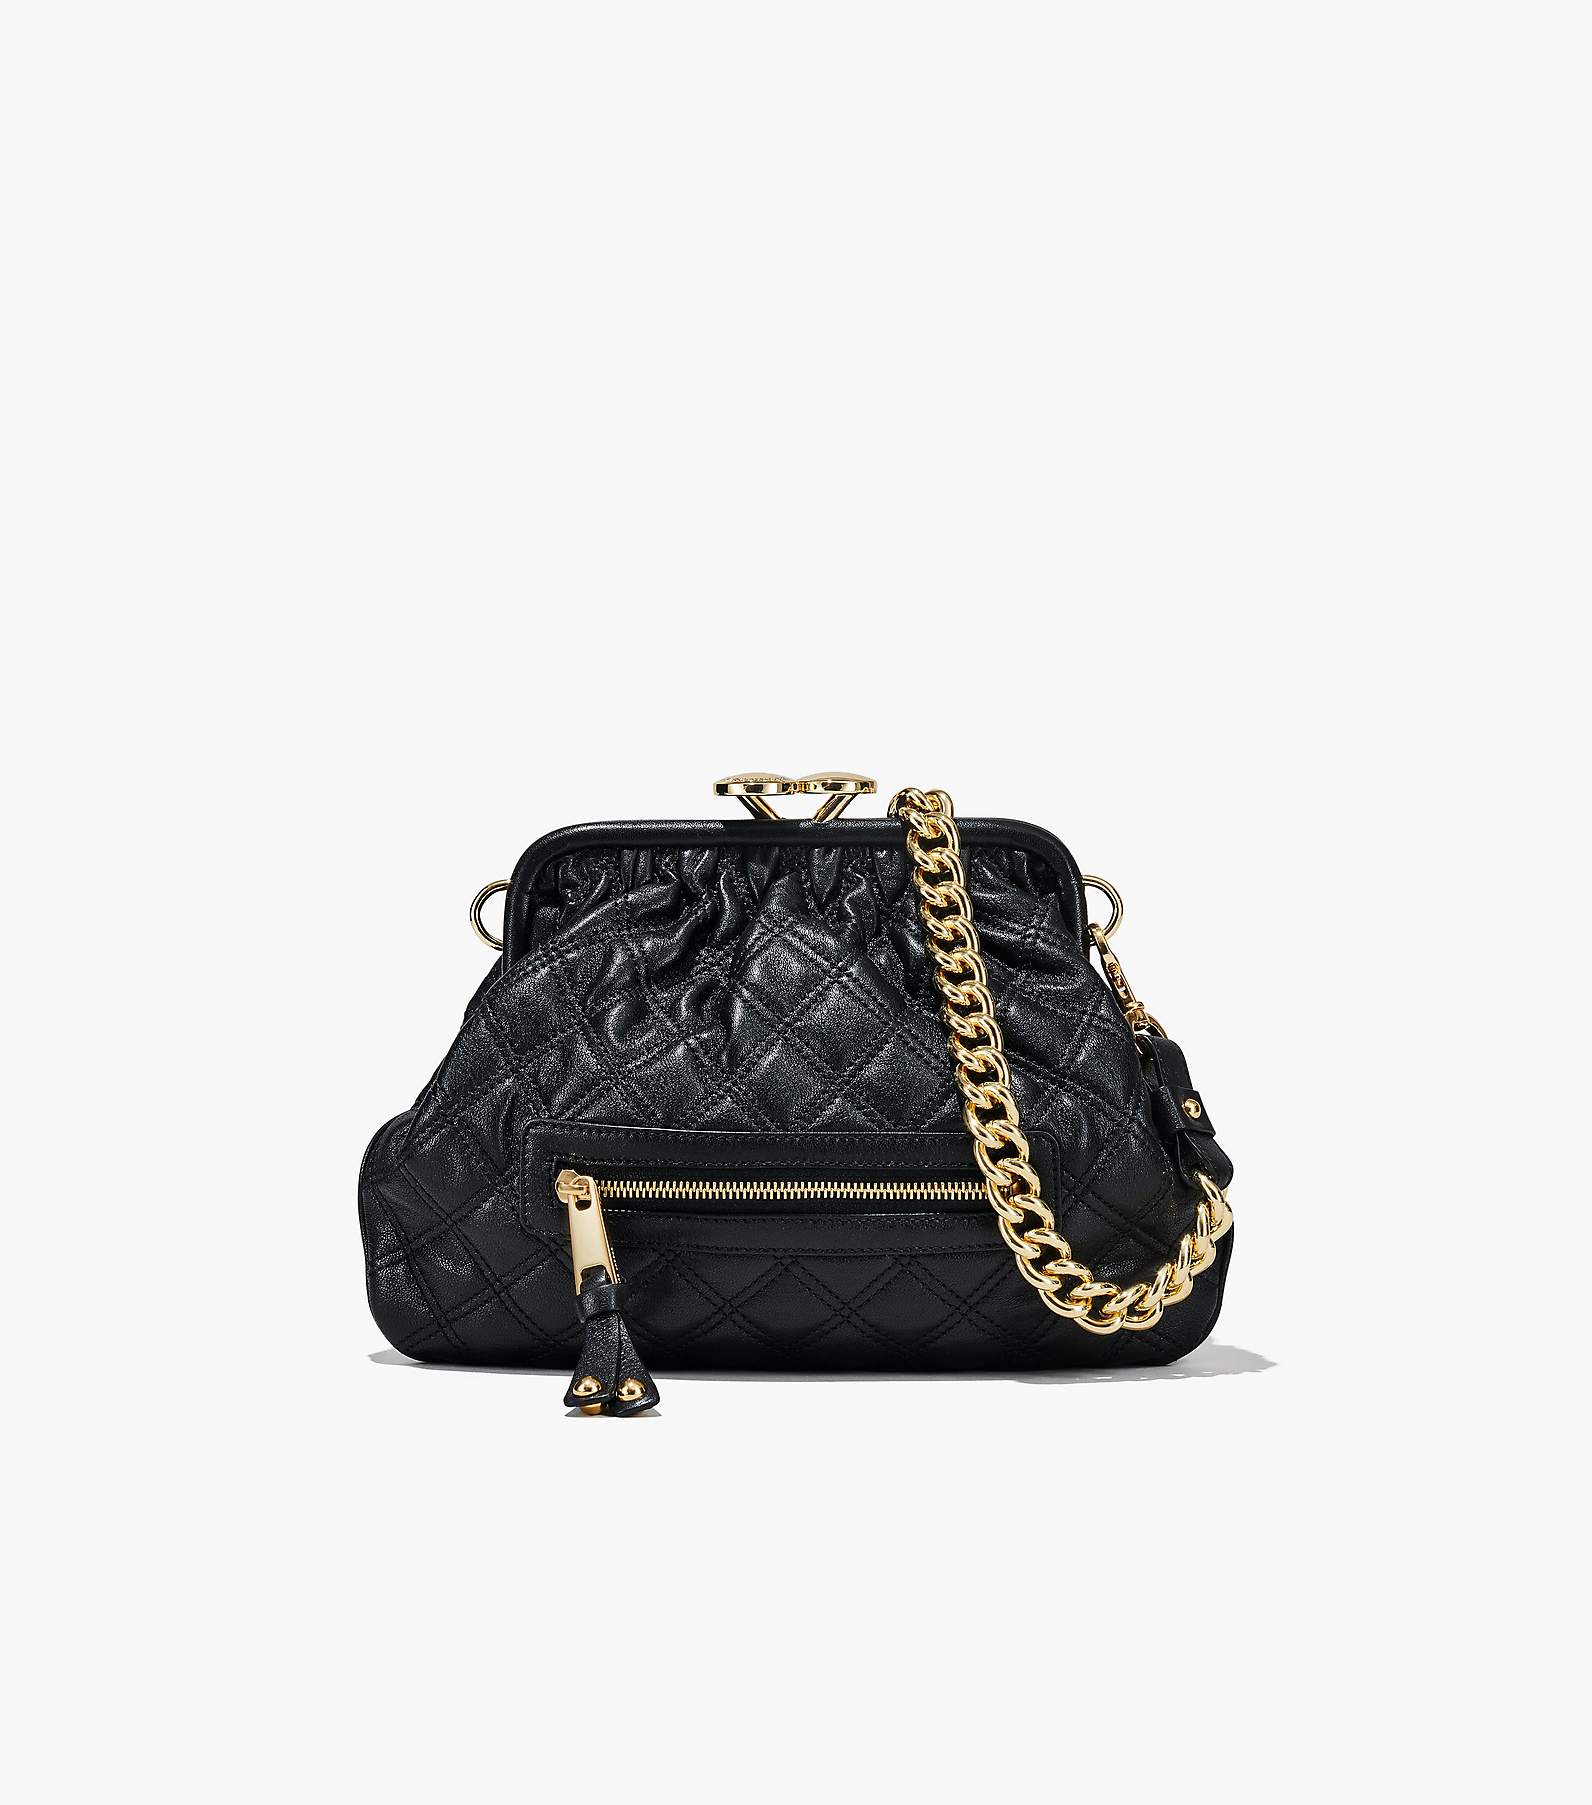 Marc Jacobs Re-edition Quilted Leather Stam Bag in Metallic